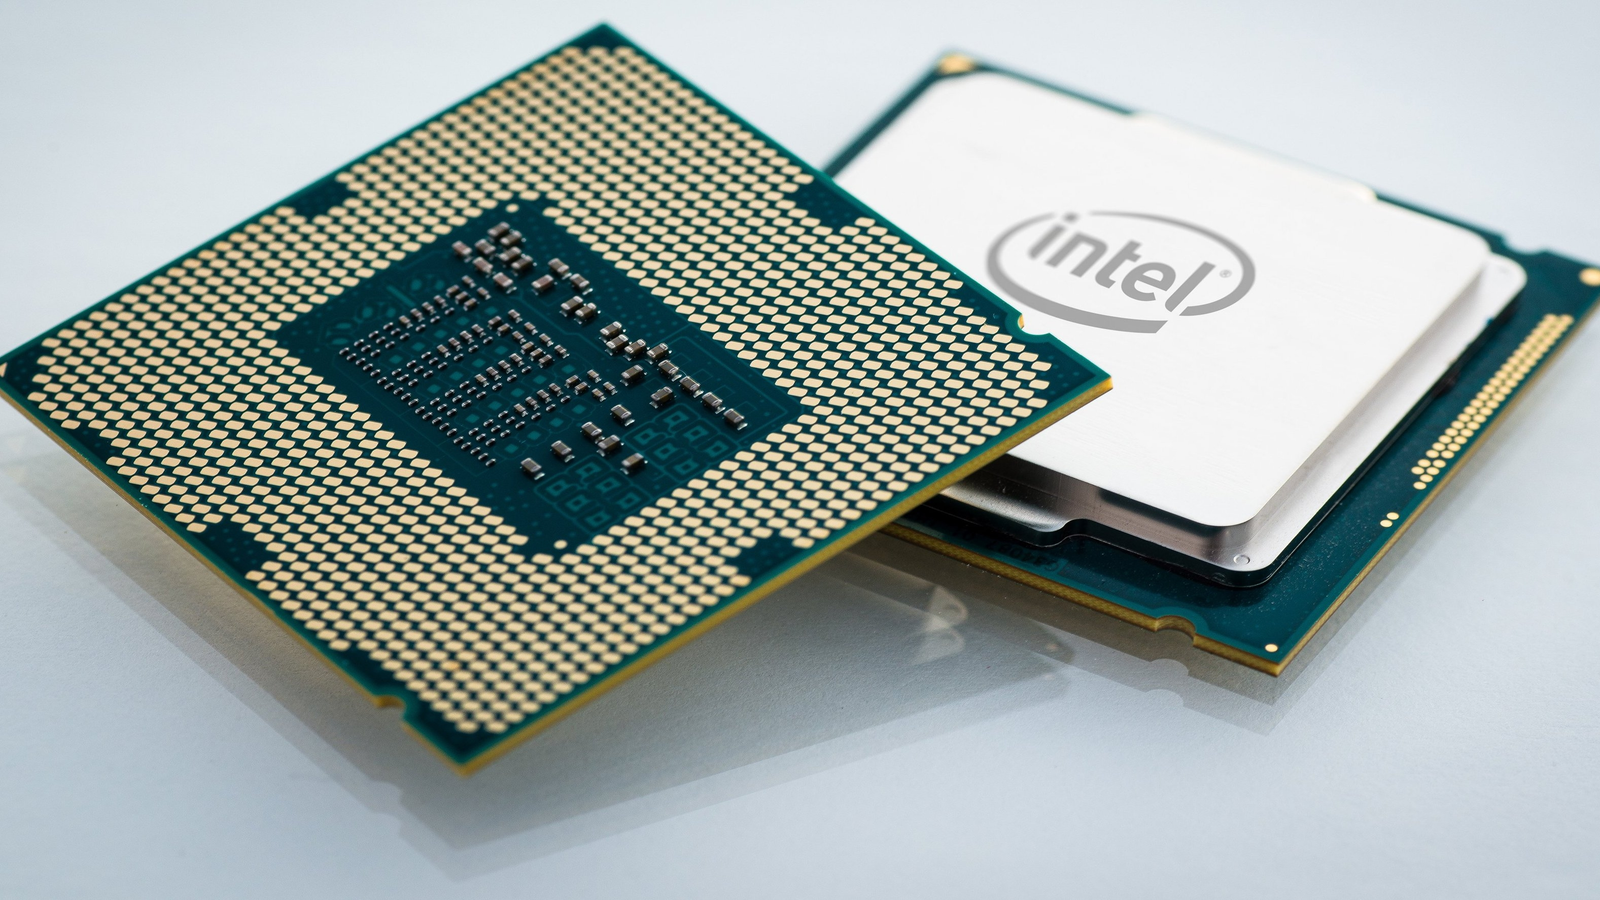 CPU Benchmarks - Devil's Canyon Review: Intel Core i7-4790K and i5